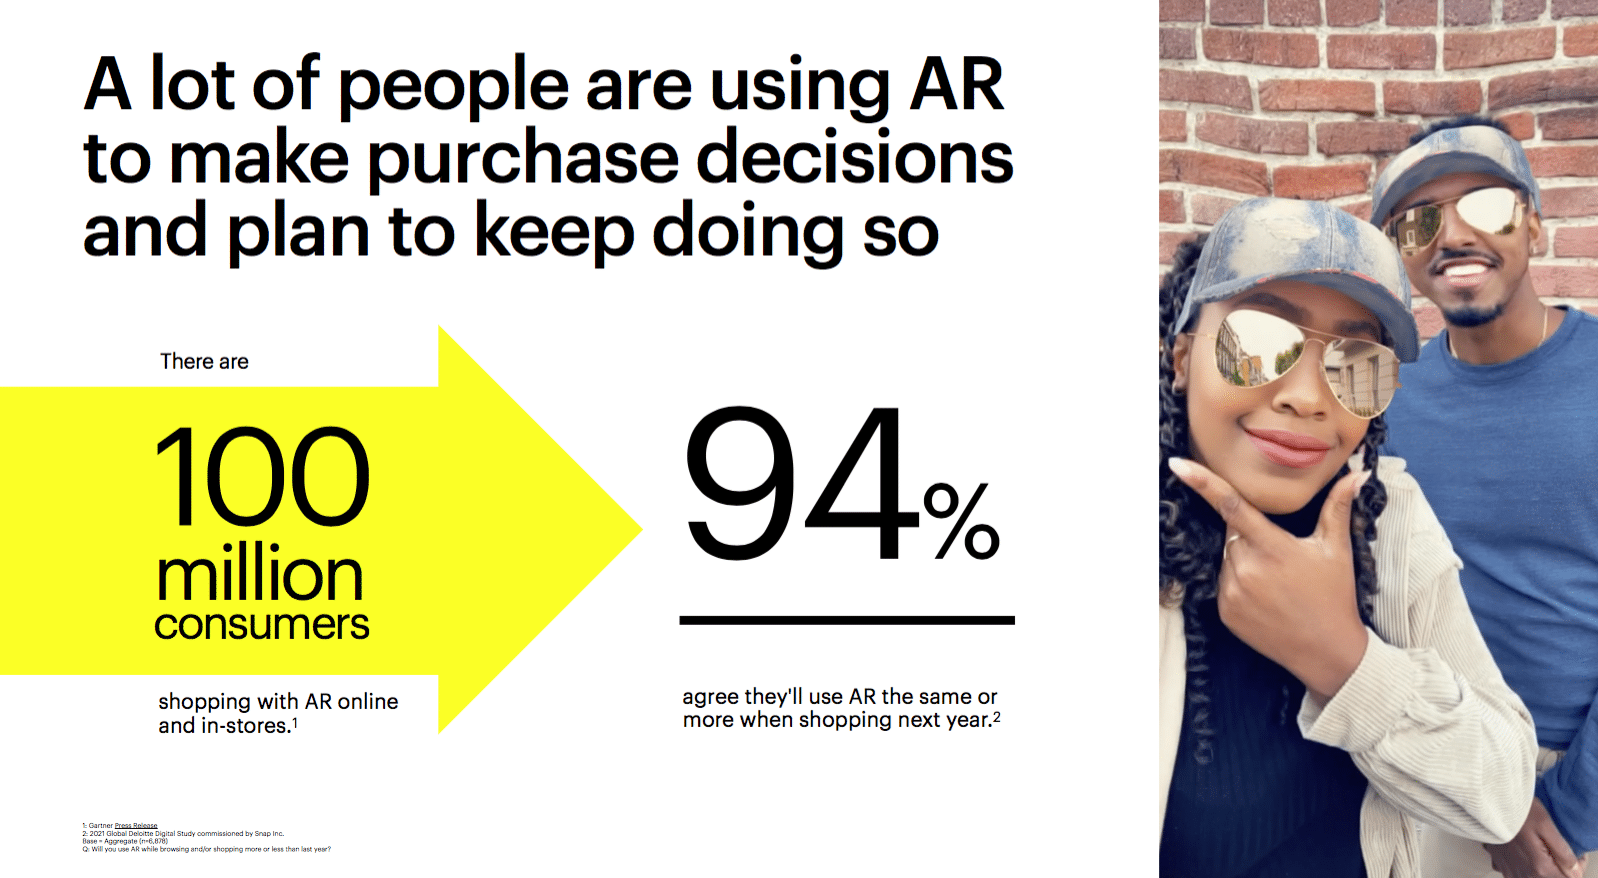 Augmented Reality has arrived: Exploring the rich, untapped future of AR for brand CX